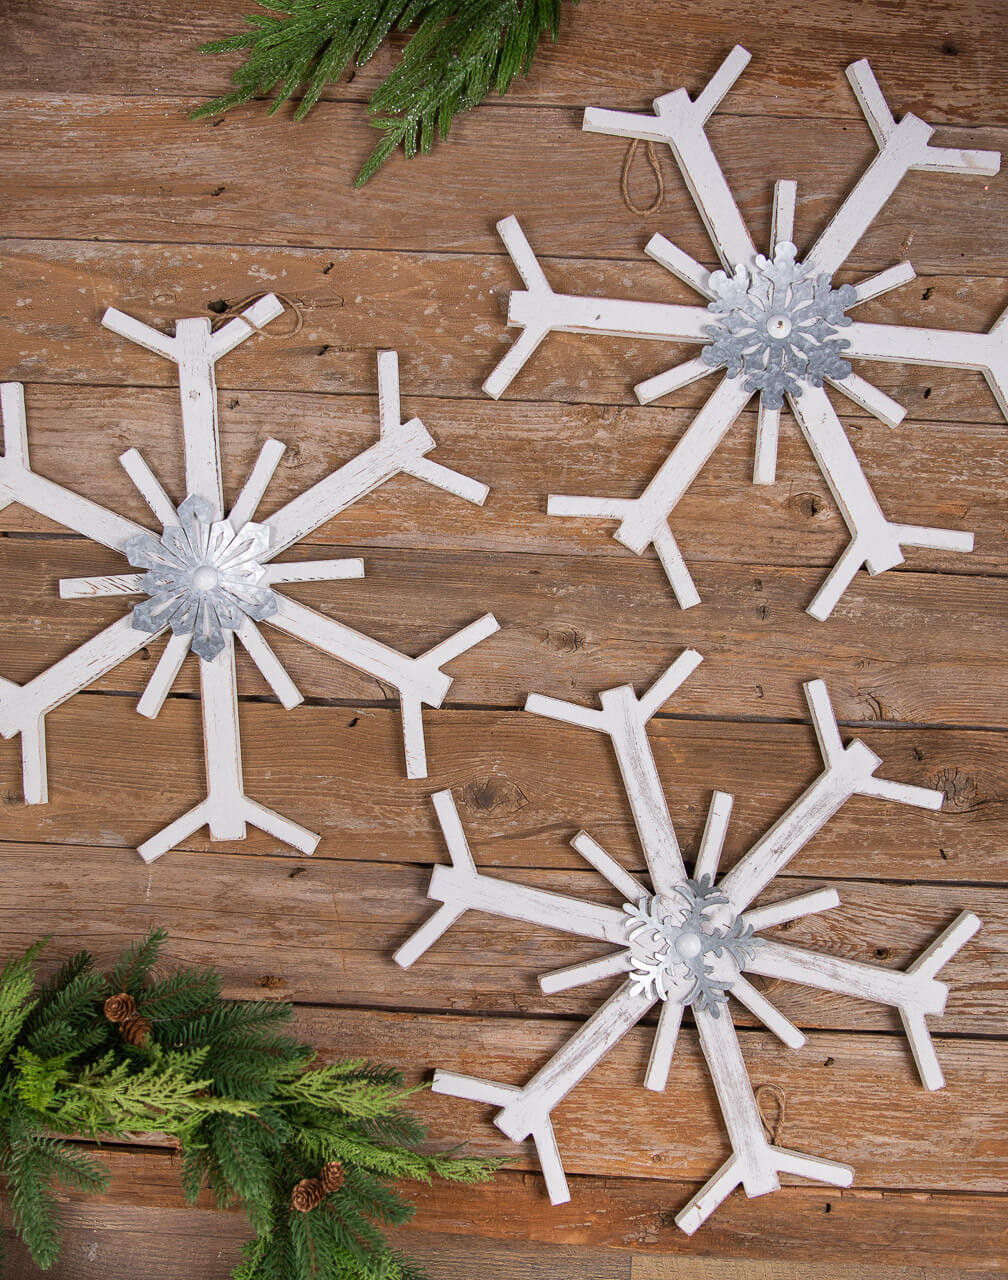 24 Pieces Wooden Snowflakes Ornaments 3inch Snowflake Christmas Ornament  for Winter Christmas Tree Decoration Holiady Gift Crafts